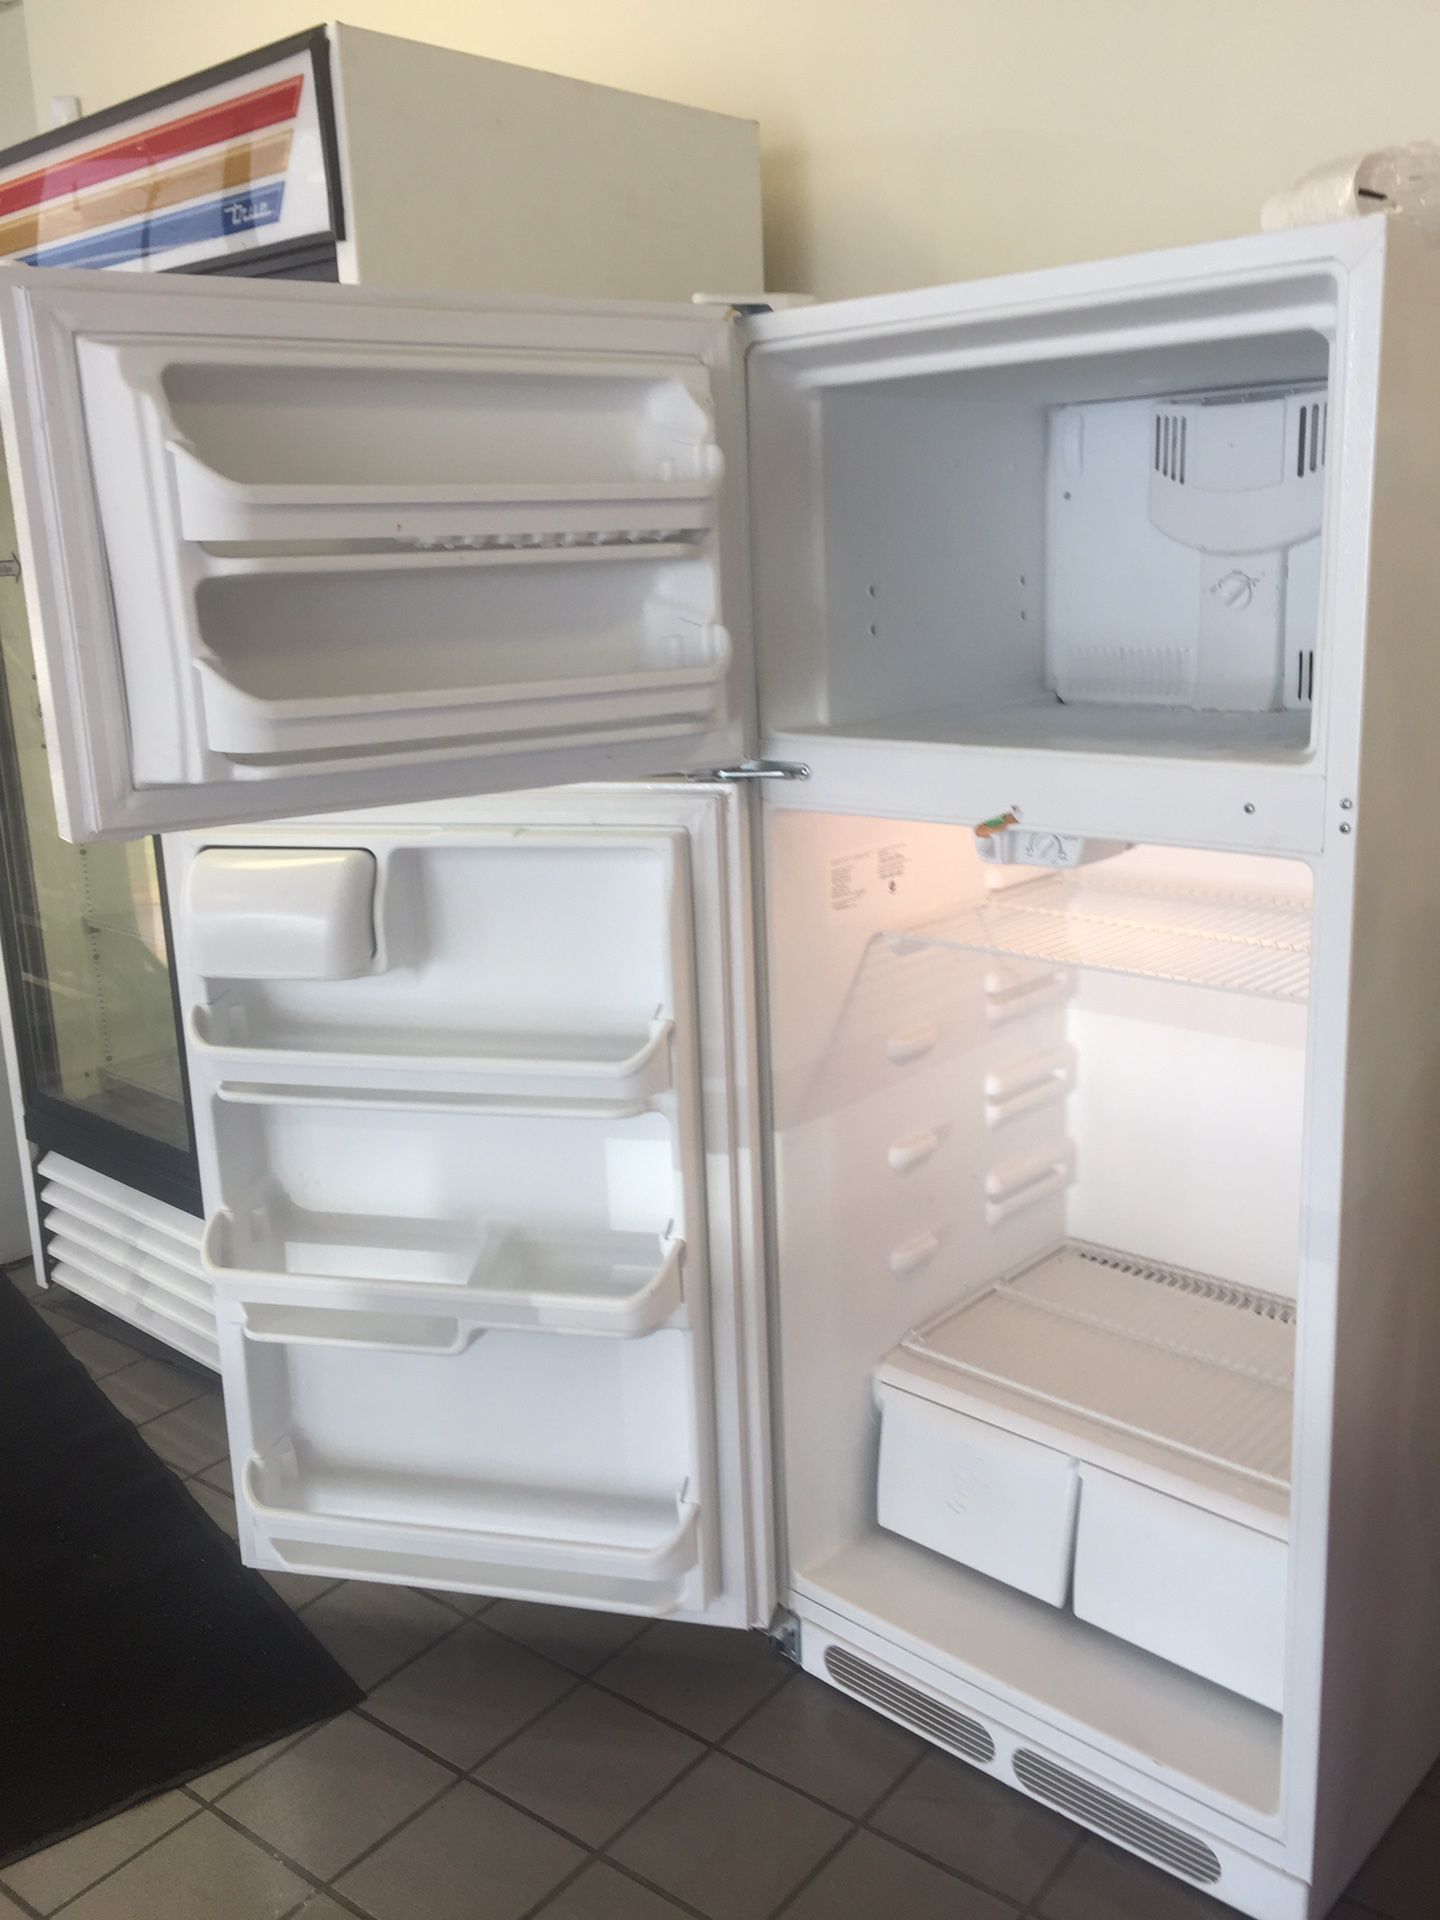 We have 2 top freezer refrigerators for sale each one is selling for $300.00